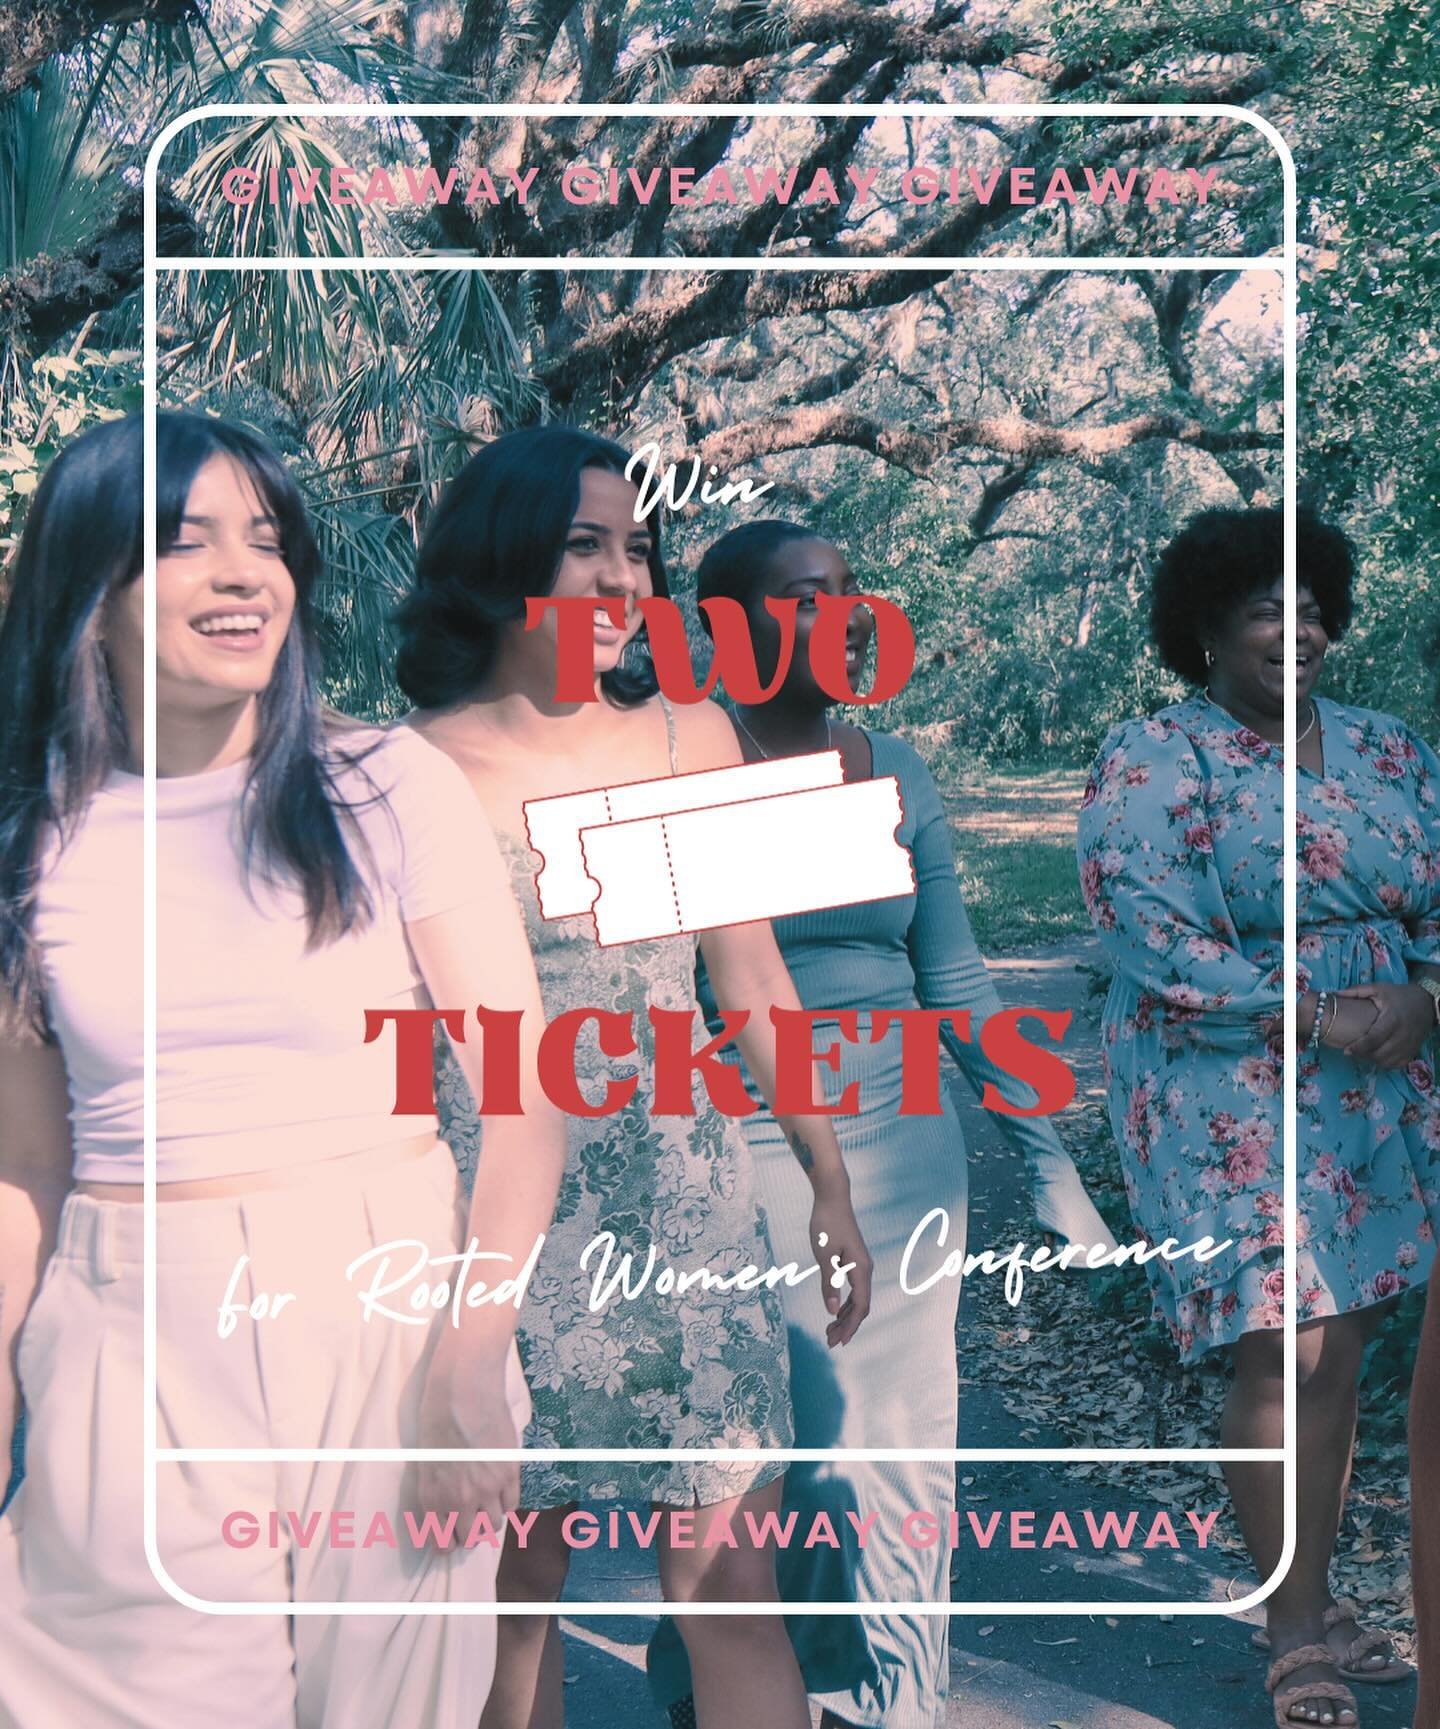 🎟️ Want to attend the Rooted Women&rsquo;s Conference on April 27th? We are giving away two tickets!! To enter this giveaway simply tag a friend you want to bring with you on this post. Each tag is one entry. Plus, share in your story for bonus entr